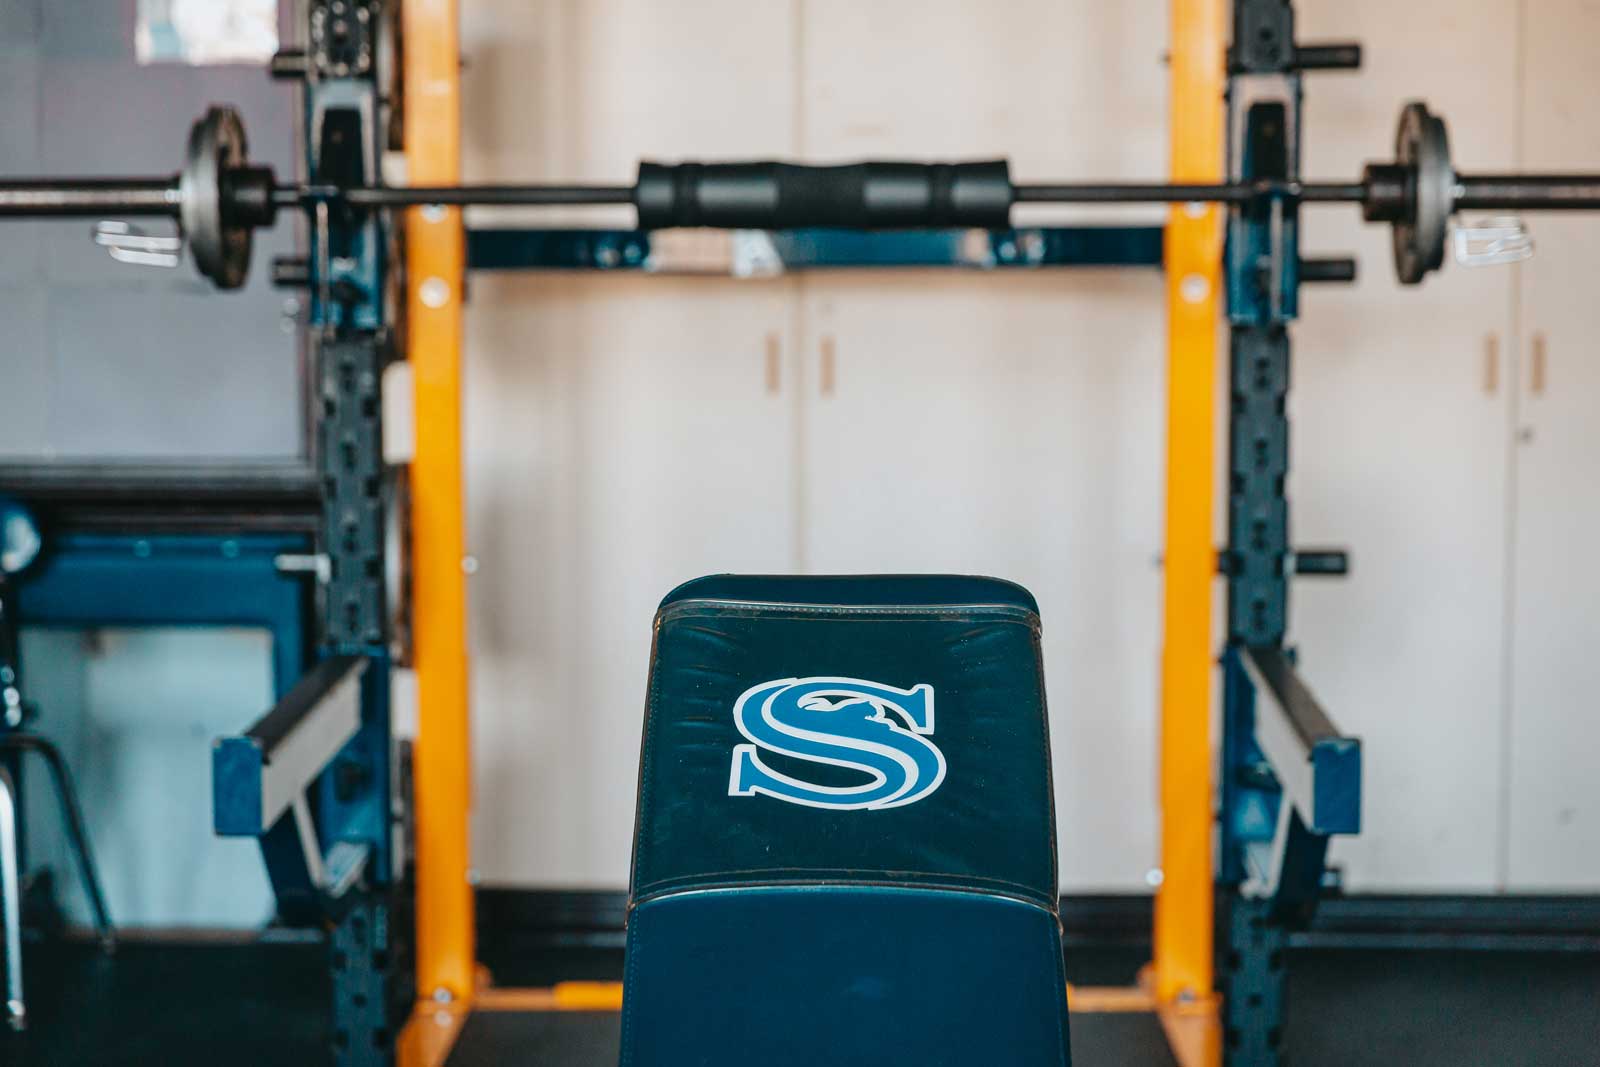 workout bench with Sullivan logo